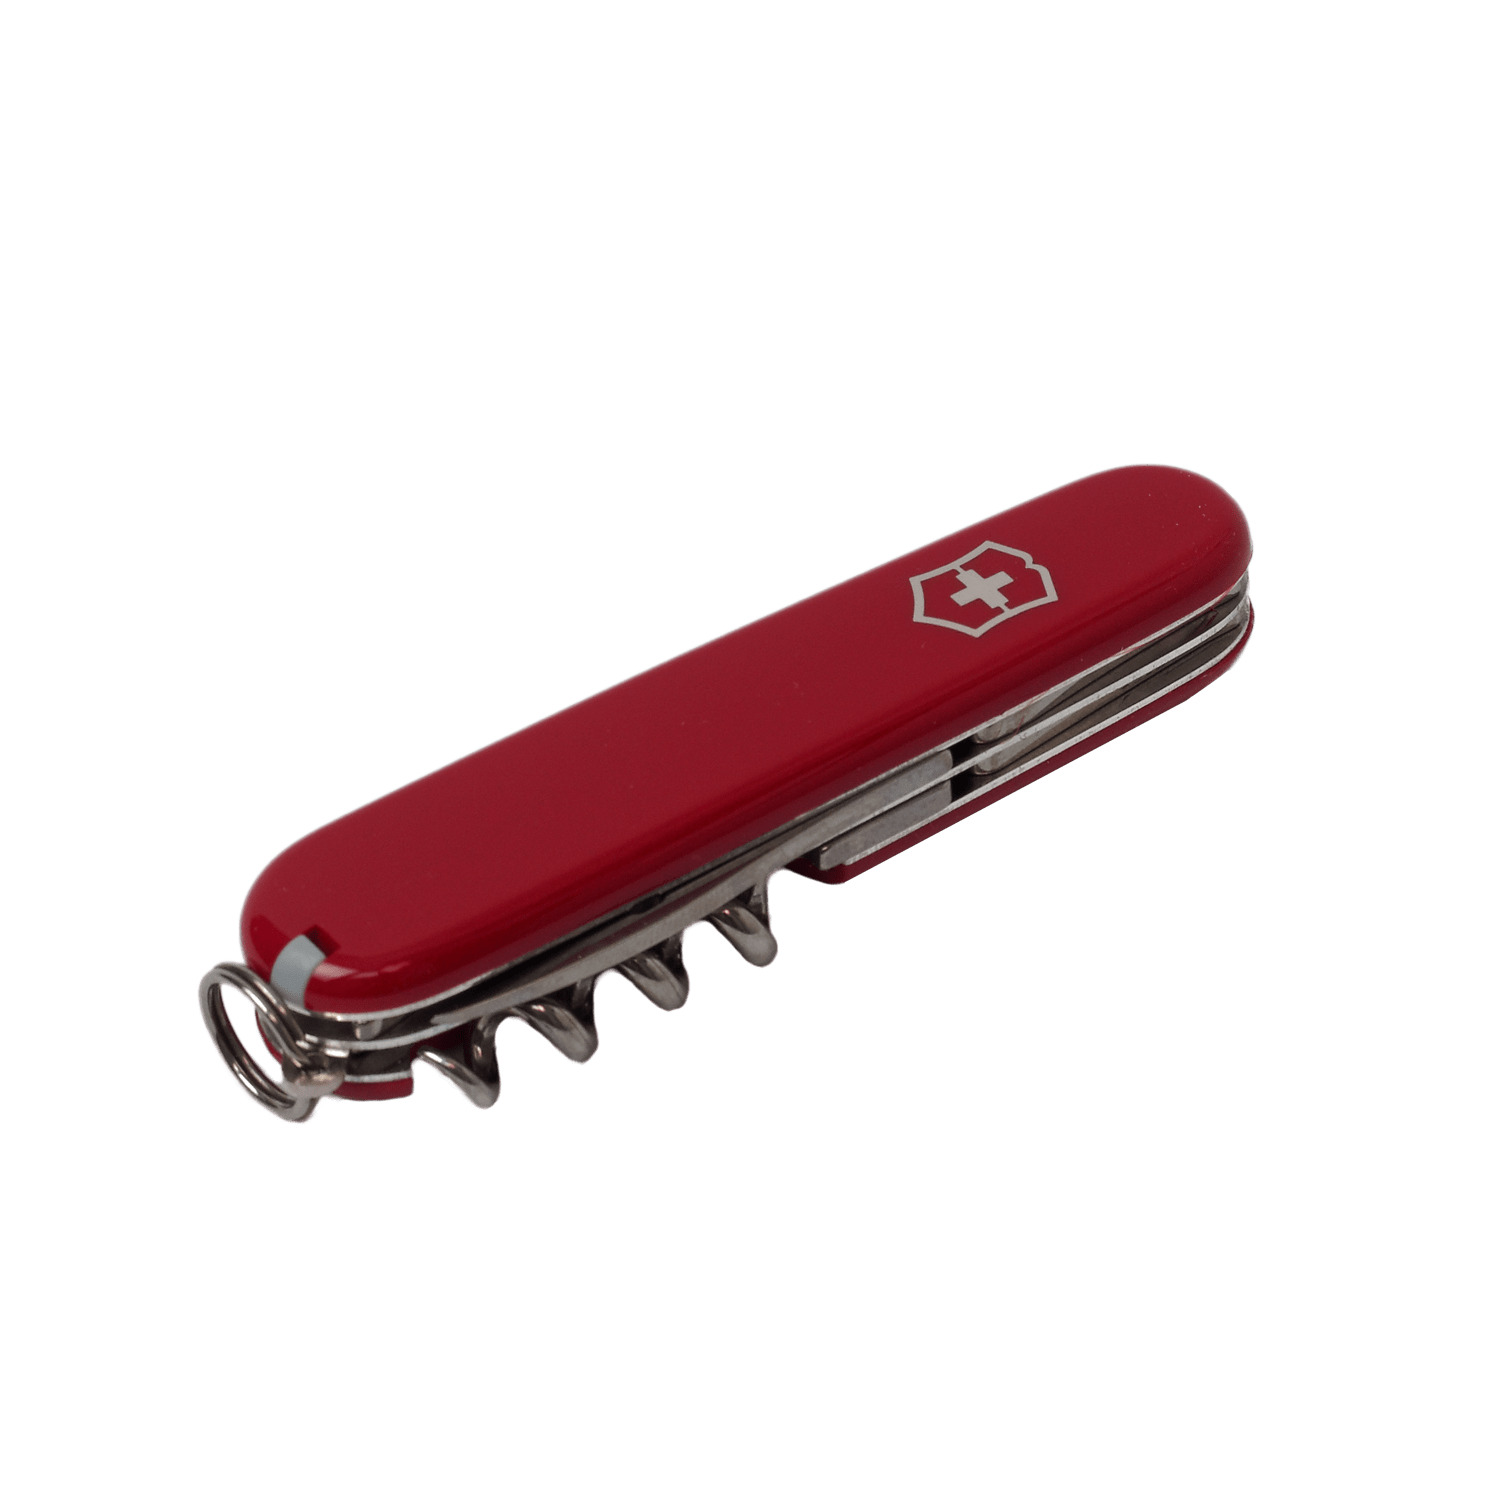 Victorinox Swiss Army Knife Closed icons